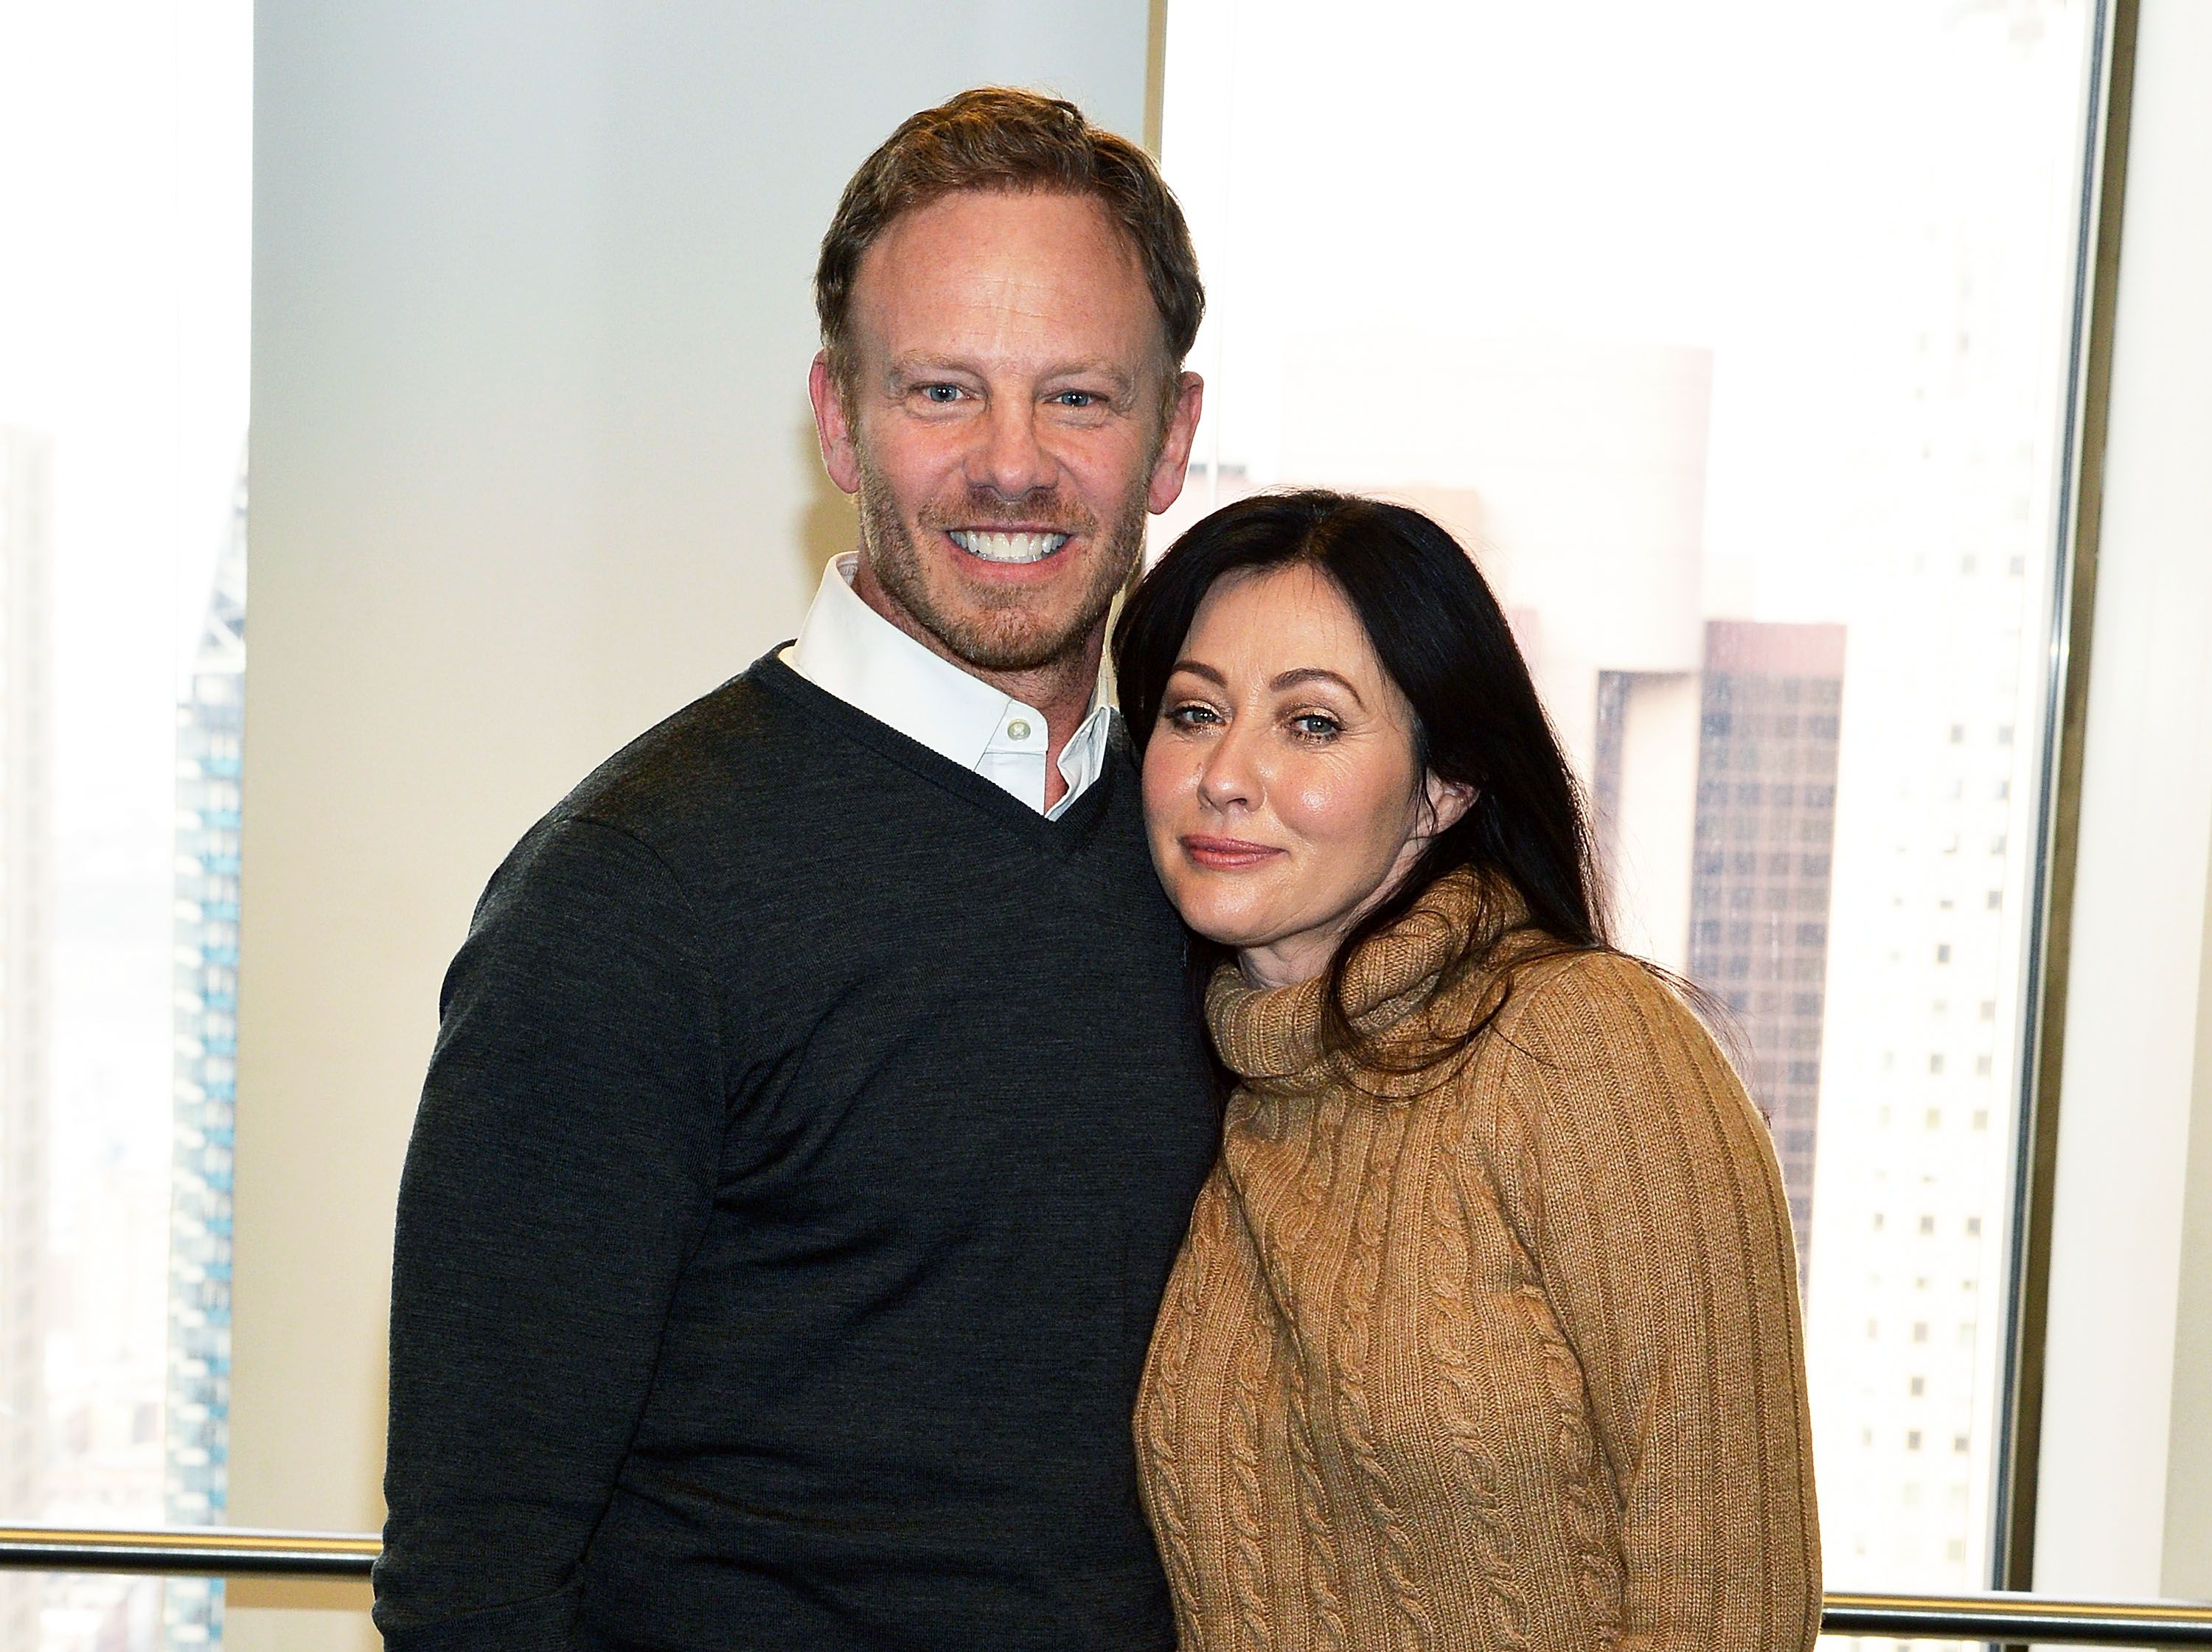 Actors Ian Ziering and Shannen Doherty at SiriusXM Studios on January 15, 2015 in New York City | Photo: Getty Images